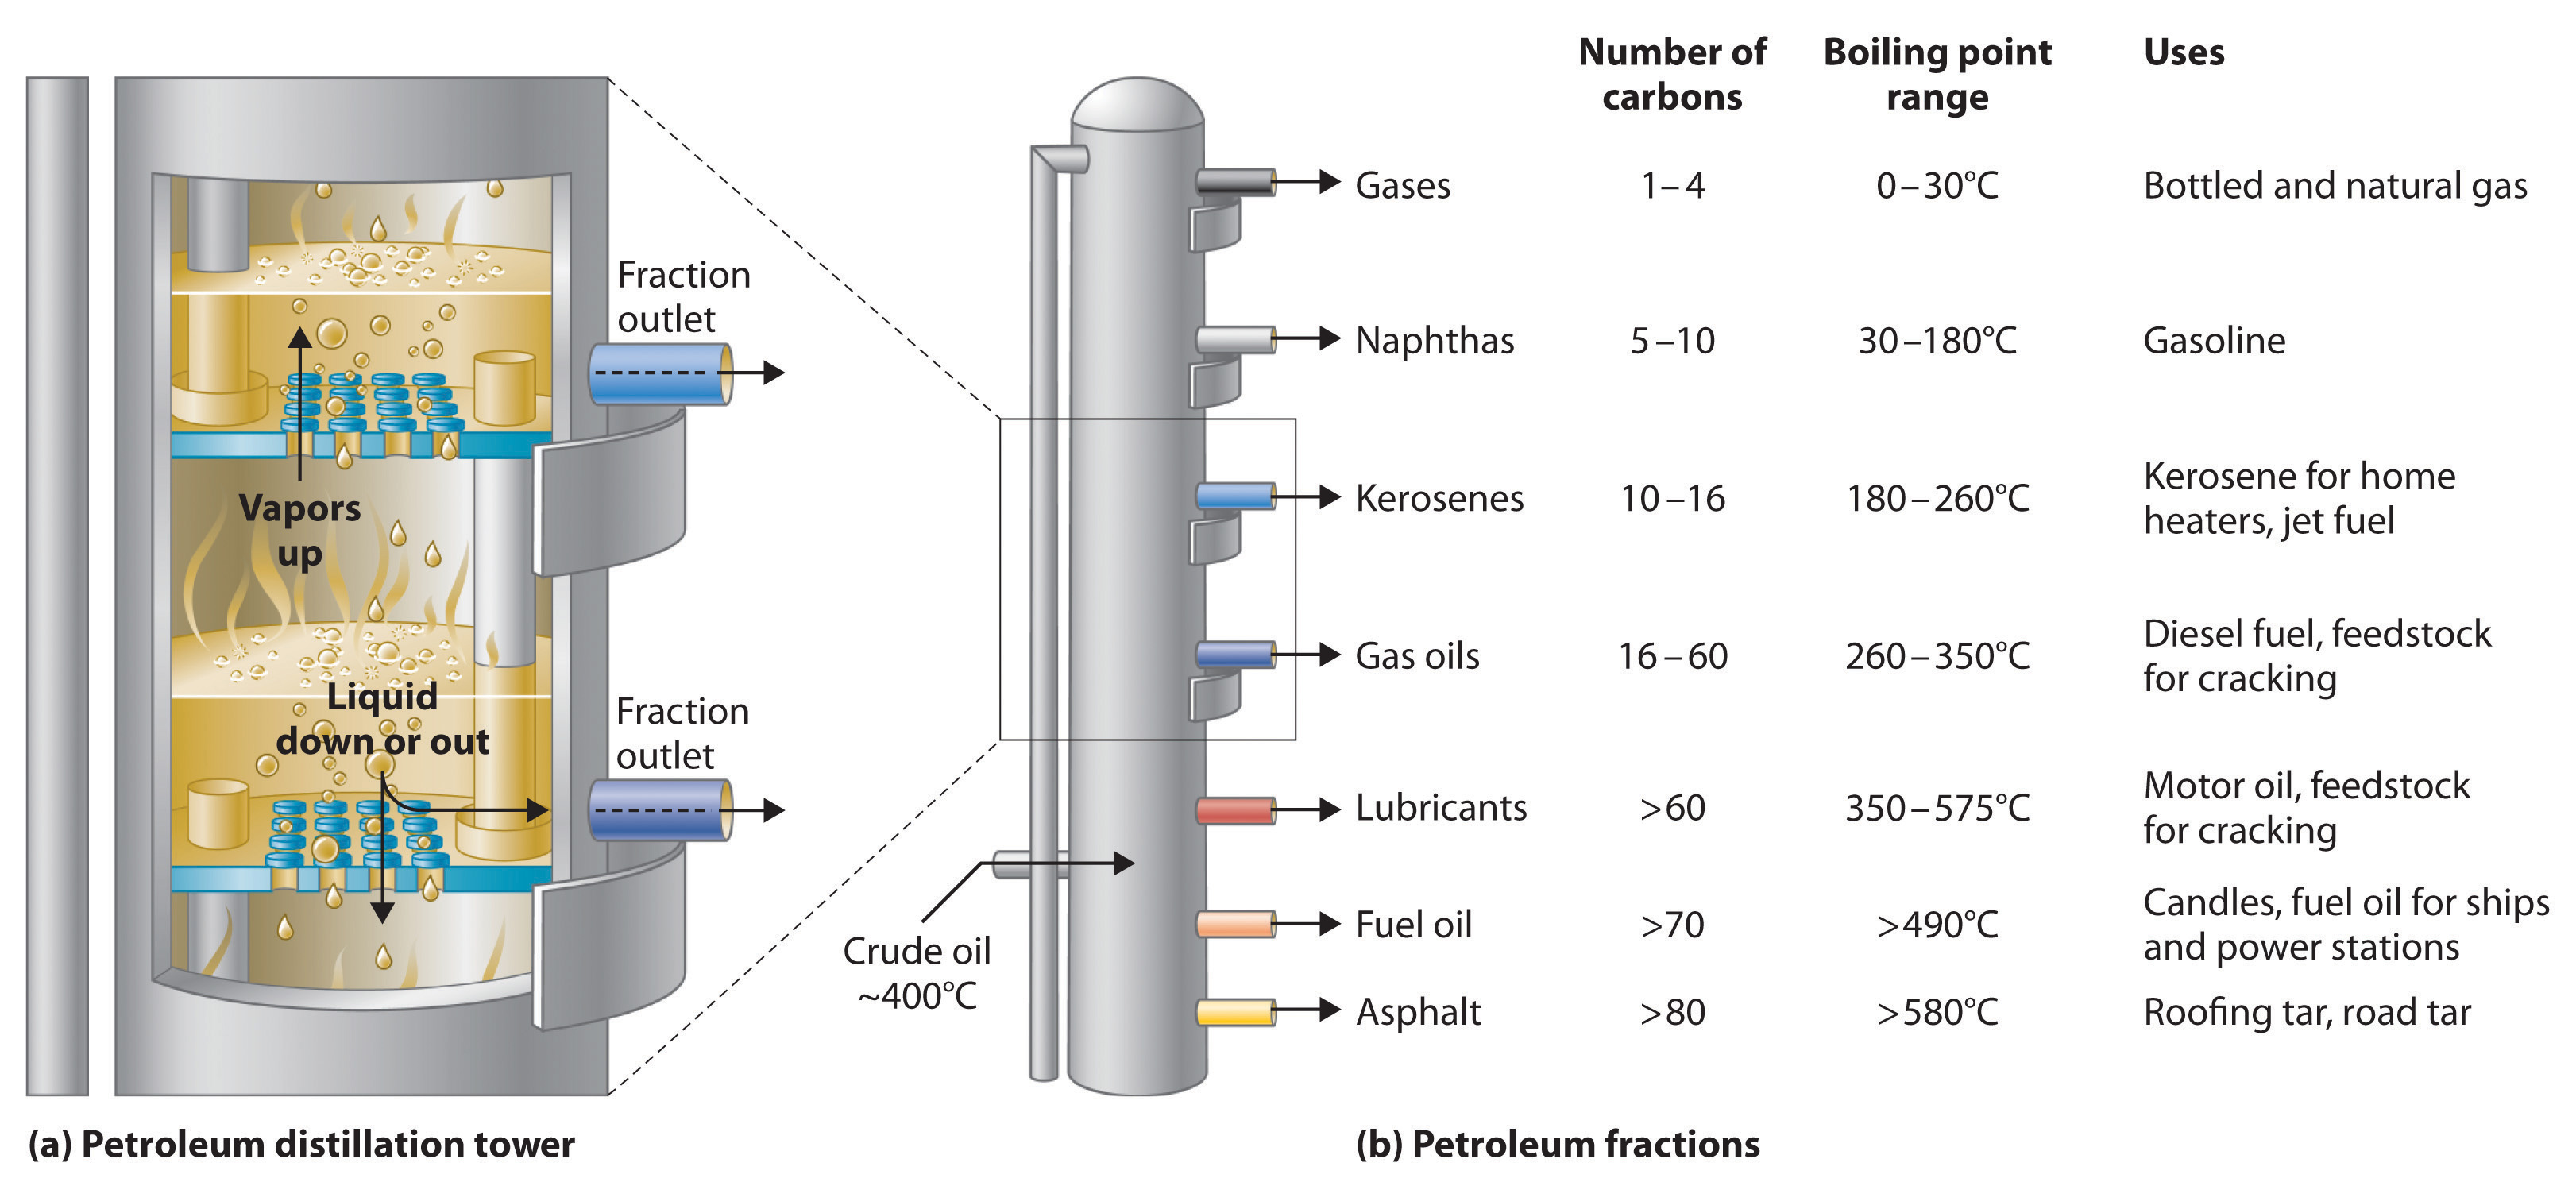 Gases have 1 to 4 carbons, a boiling range of 0 to 30, and are used in bottles and natural gas. Naphthas have 5 to 10 carbons, boil at 30 to 180, and are used as gasoline. Kerosenes have 10 to 16 carbons, boil at 180 to 260, and are used in home heaters and jet fuel. Gas oils have 16 to 60 carbons, boil at 260 to 350, and are used in diesel fuel and feedstock for cracking. Lubricants have more than 60 carbons, boil at 350 to 575, and are used in motor oil and as feedstock for cracking. Fuel oil has more than 70 carbons, boils above 490, and are used in candles and as fuel oil for ships and power stations. Asphalt has more than 80 carbons, boils above 580, and are used as roofing and road tar.